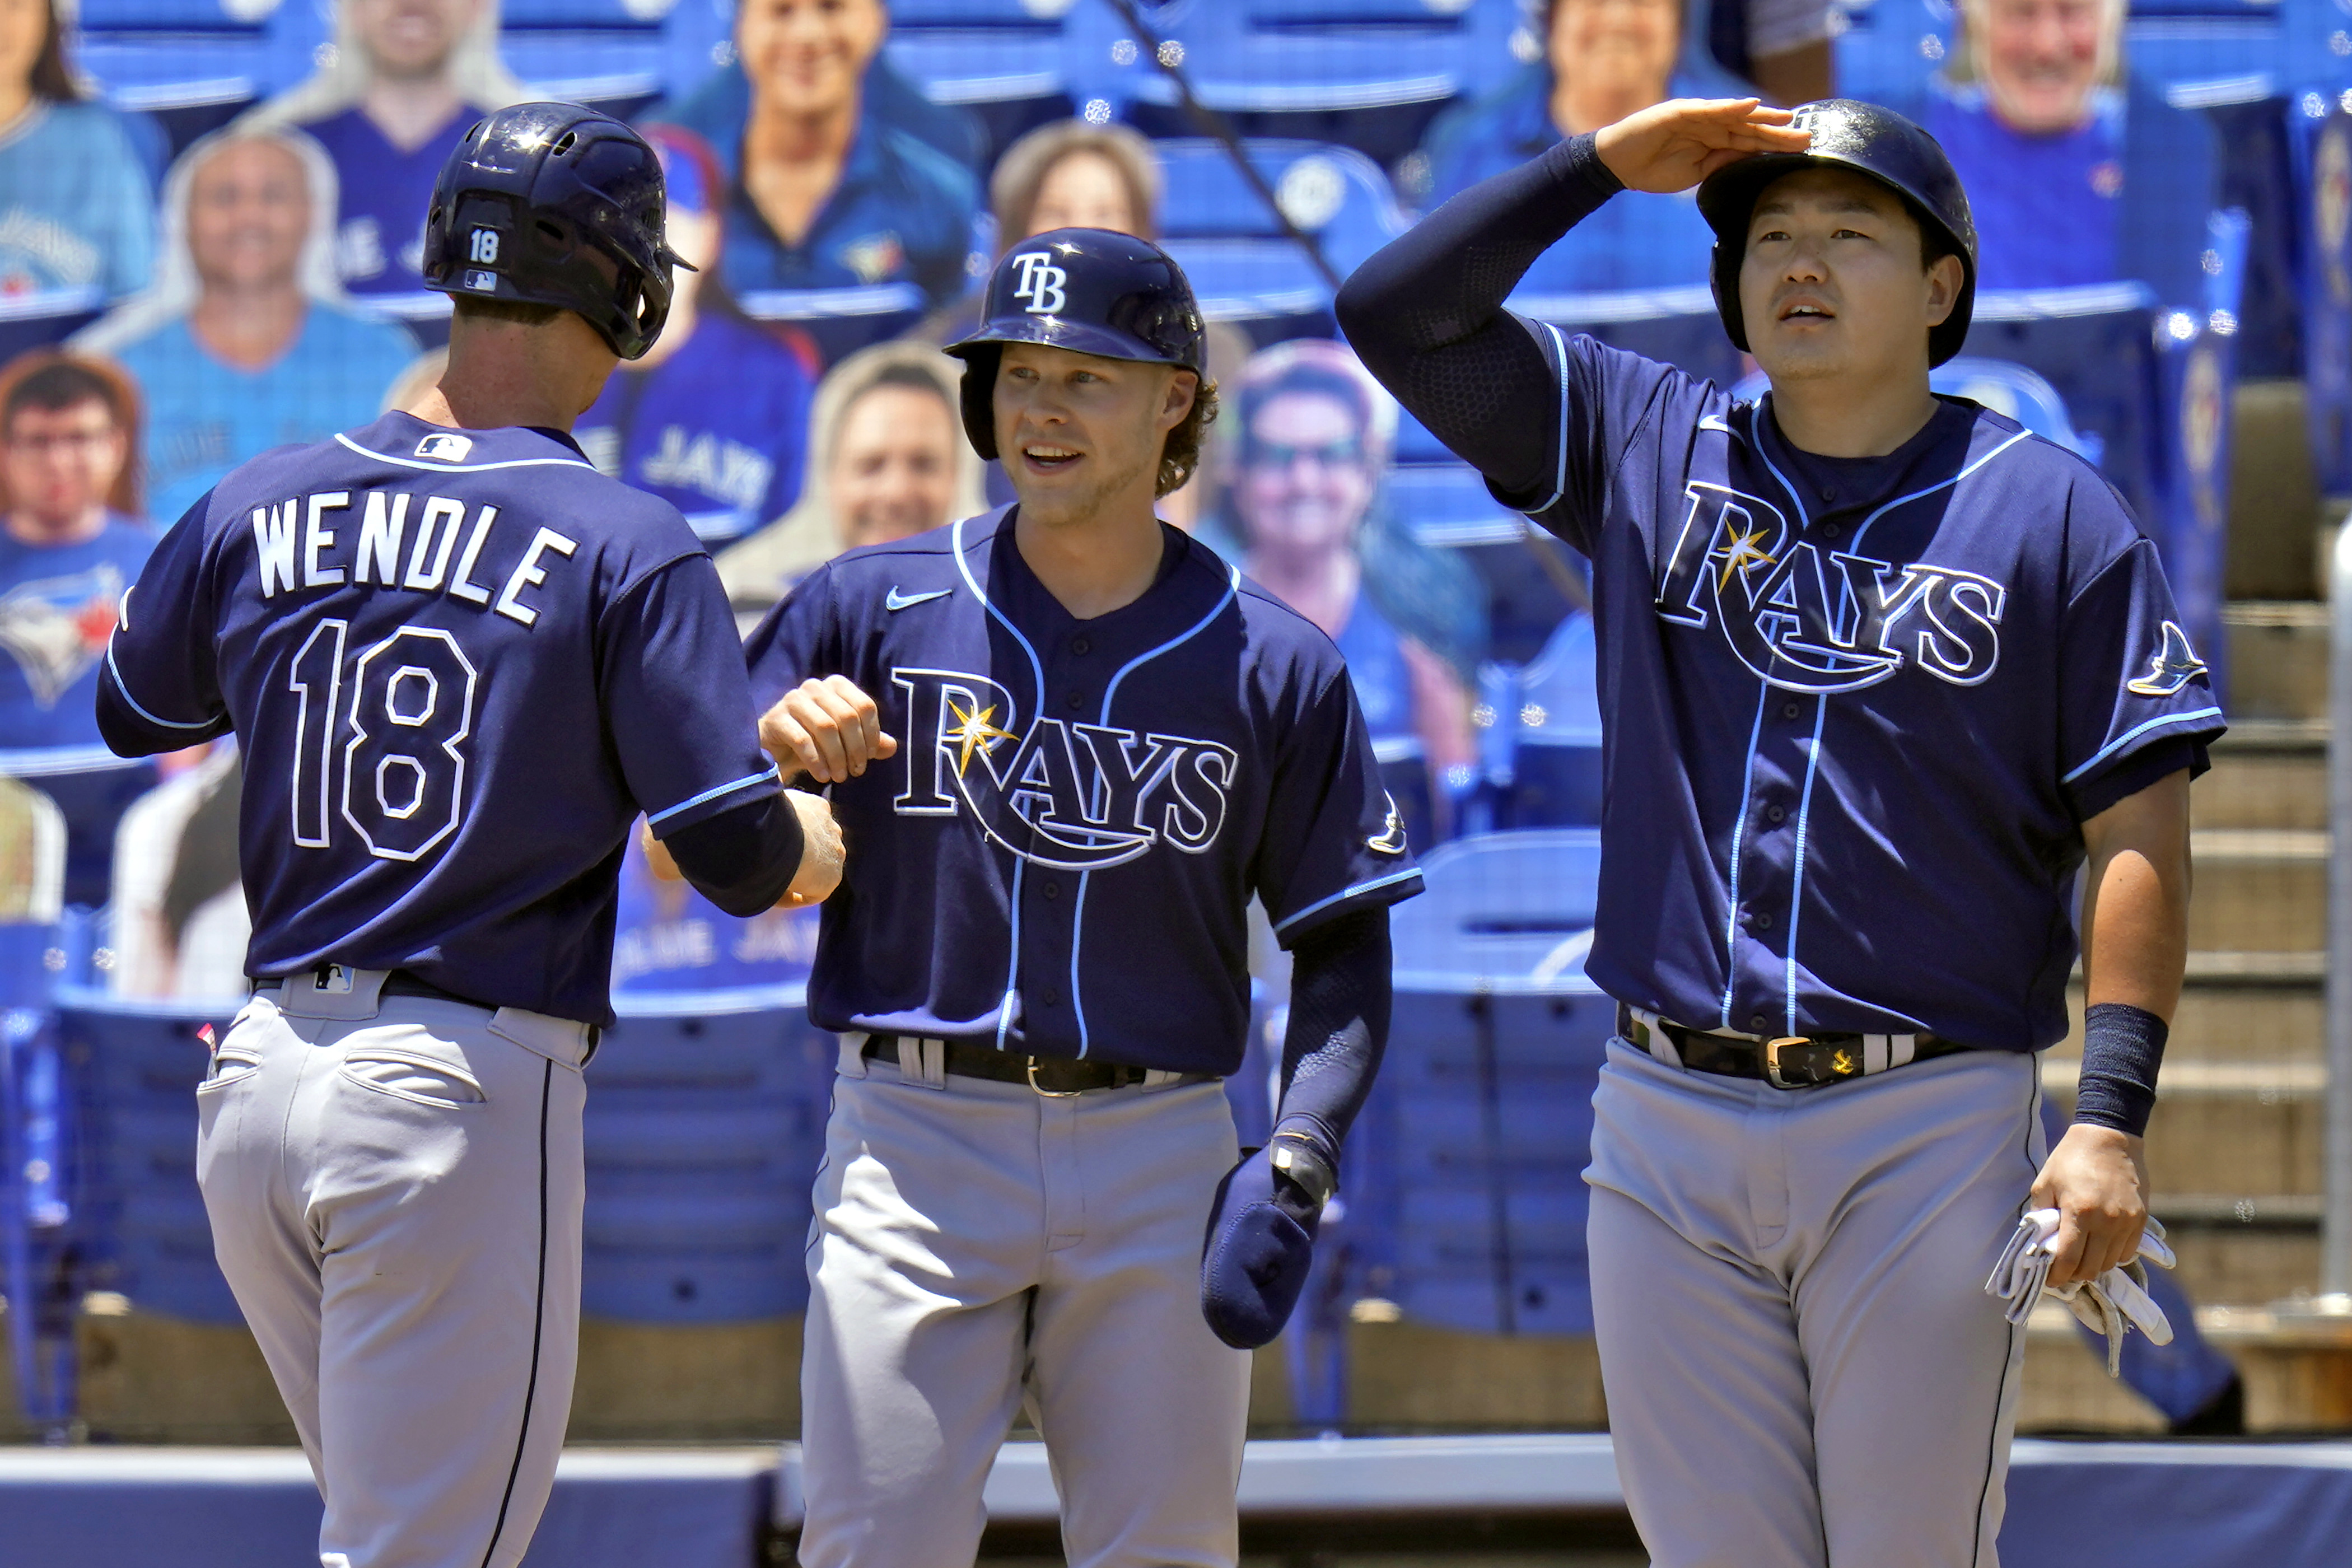 Rays rally with 5 walks in 9th, top Jays for 10th win in row